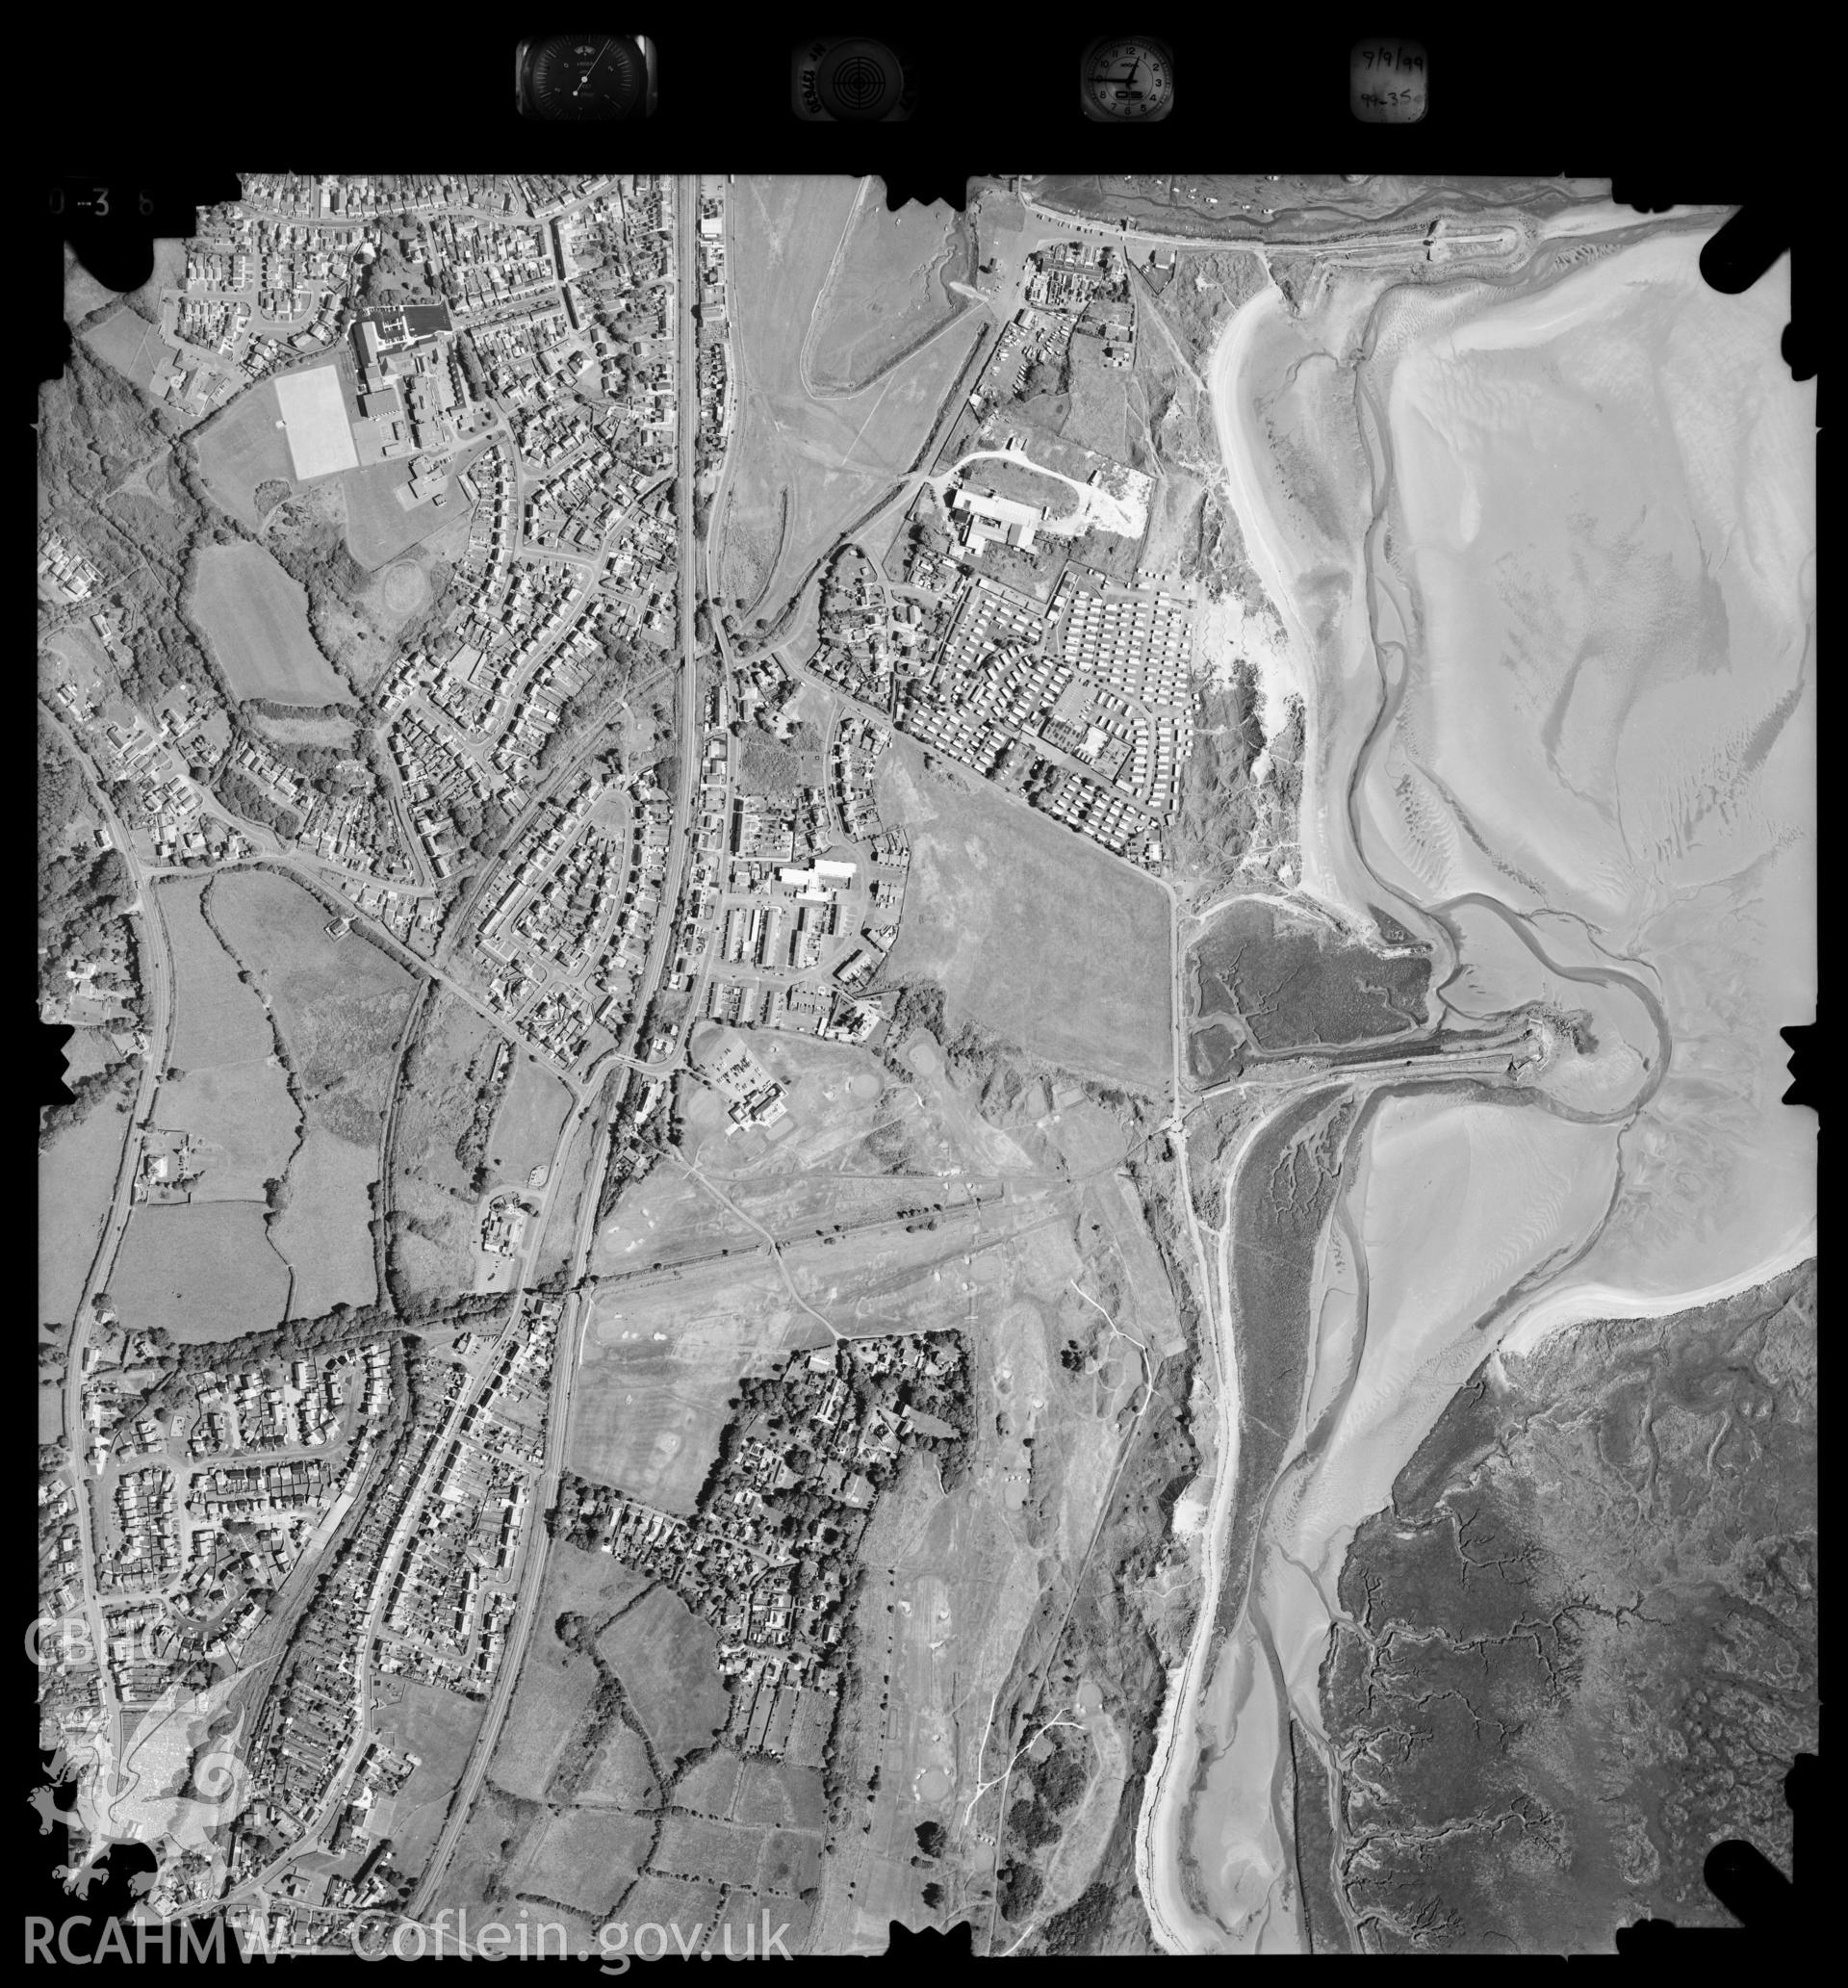 Digitized copy of an aerial photograph showing the Burry Port area, taken by Ordnance Survey, 1999.